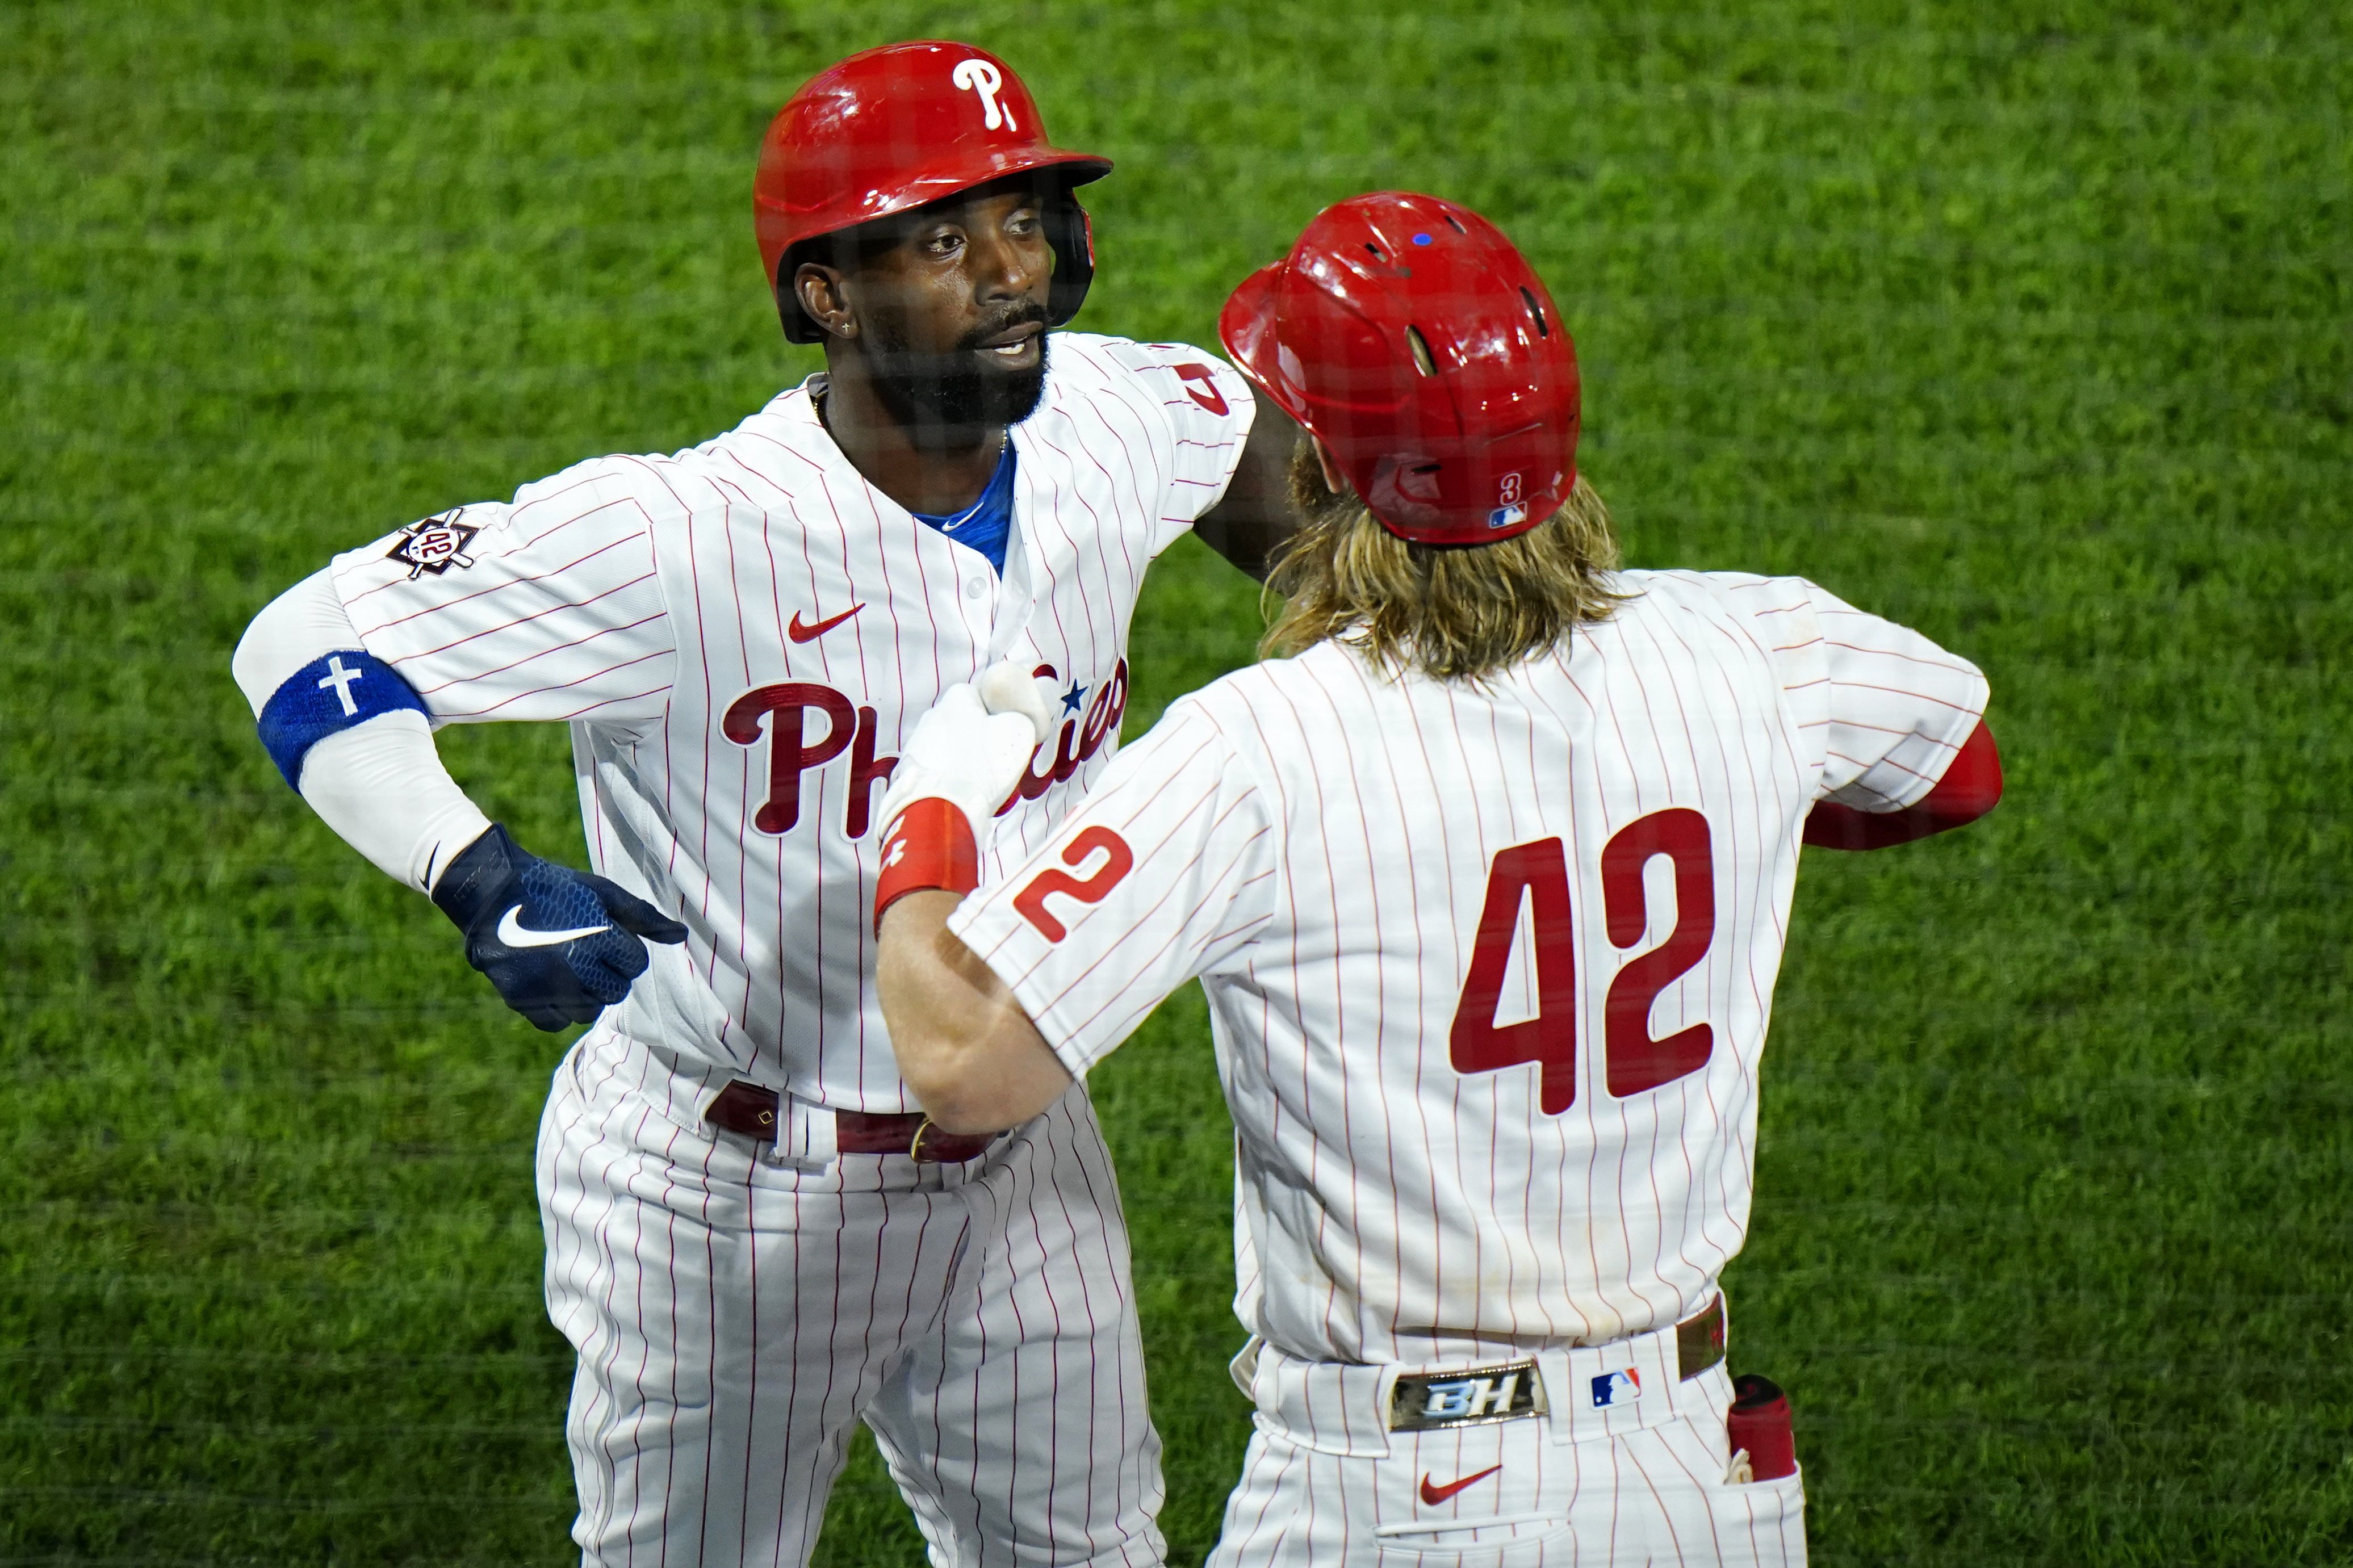 Scott Kingery's walk-off HR lifts Phillies over Braves for 4th